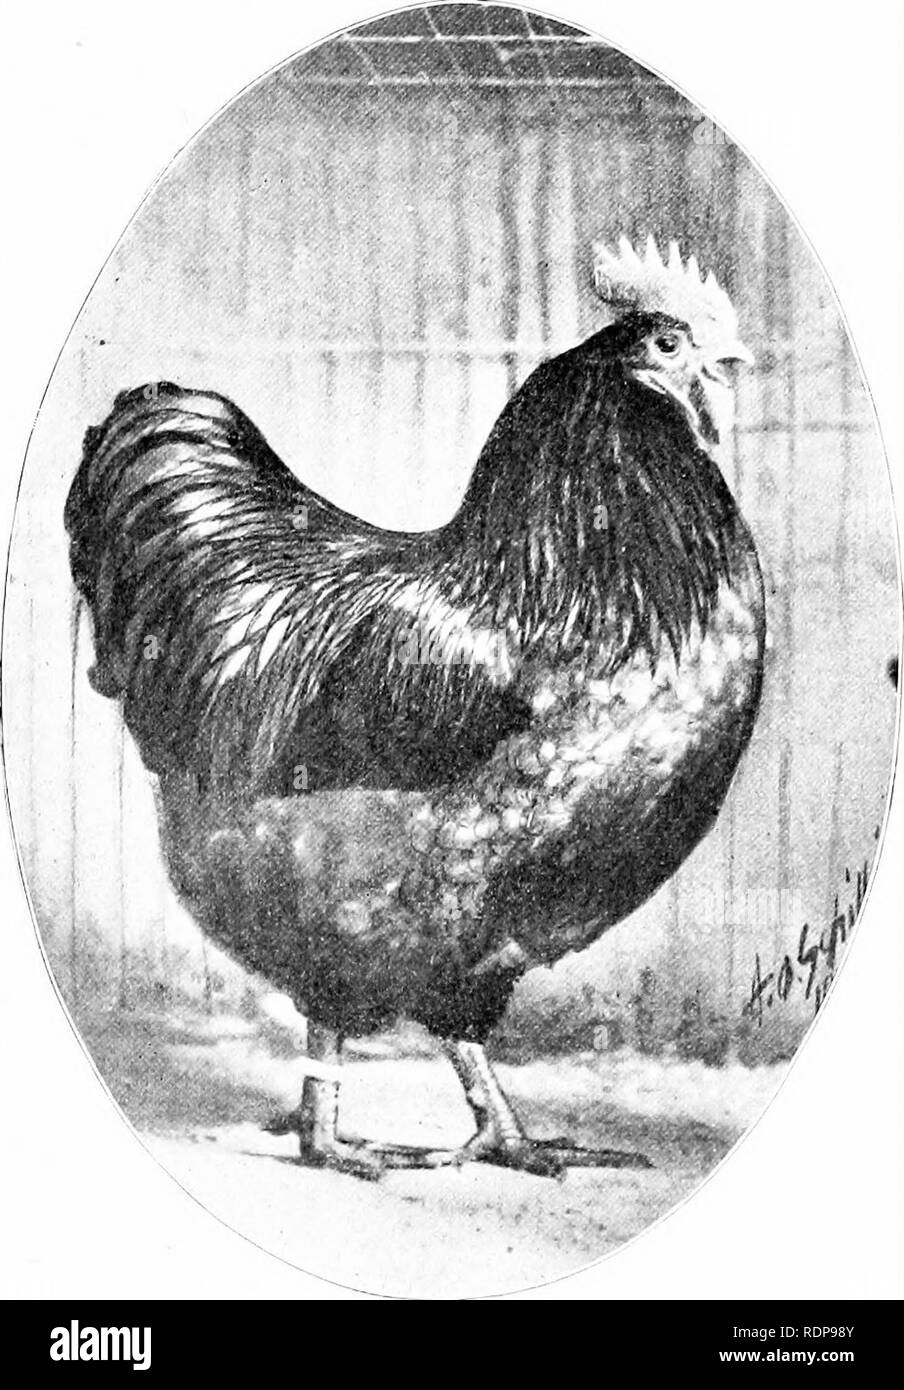 . Standard-bred Orpingtons, black, buff and white, their practical qualities; the standard requirements; how to judge them; how to mate and breed for best results, with a chapter on new non-standard varieties. Orpington chicken. 11 THE ORPINGTONS ripportunity to judge which were the best pure breeds. I ha u found good layers of every breed, and I have never yet kept any breed of fowls some of which did not lay all through the winter months. In this way I proved that the laying powers of the fowls are not so much regulated by the breed as by the strain. I found that the Plymouth Rock stood at  Stock Photo